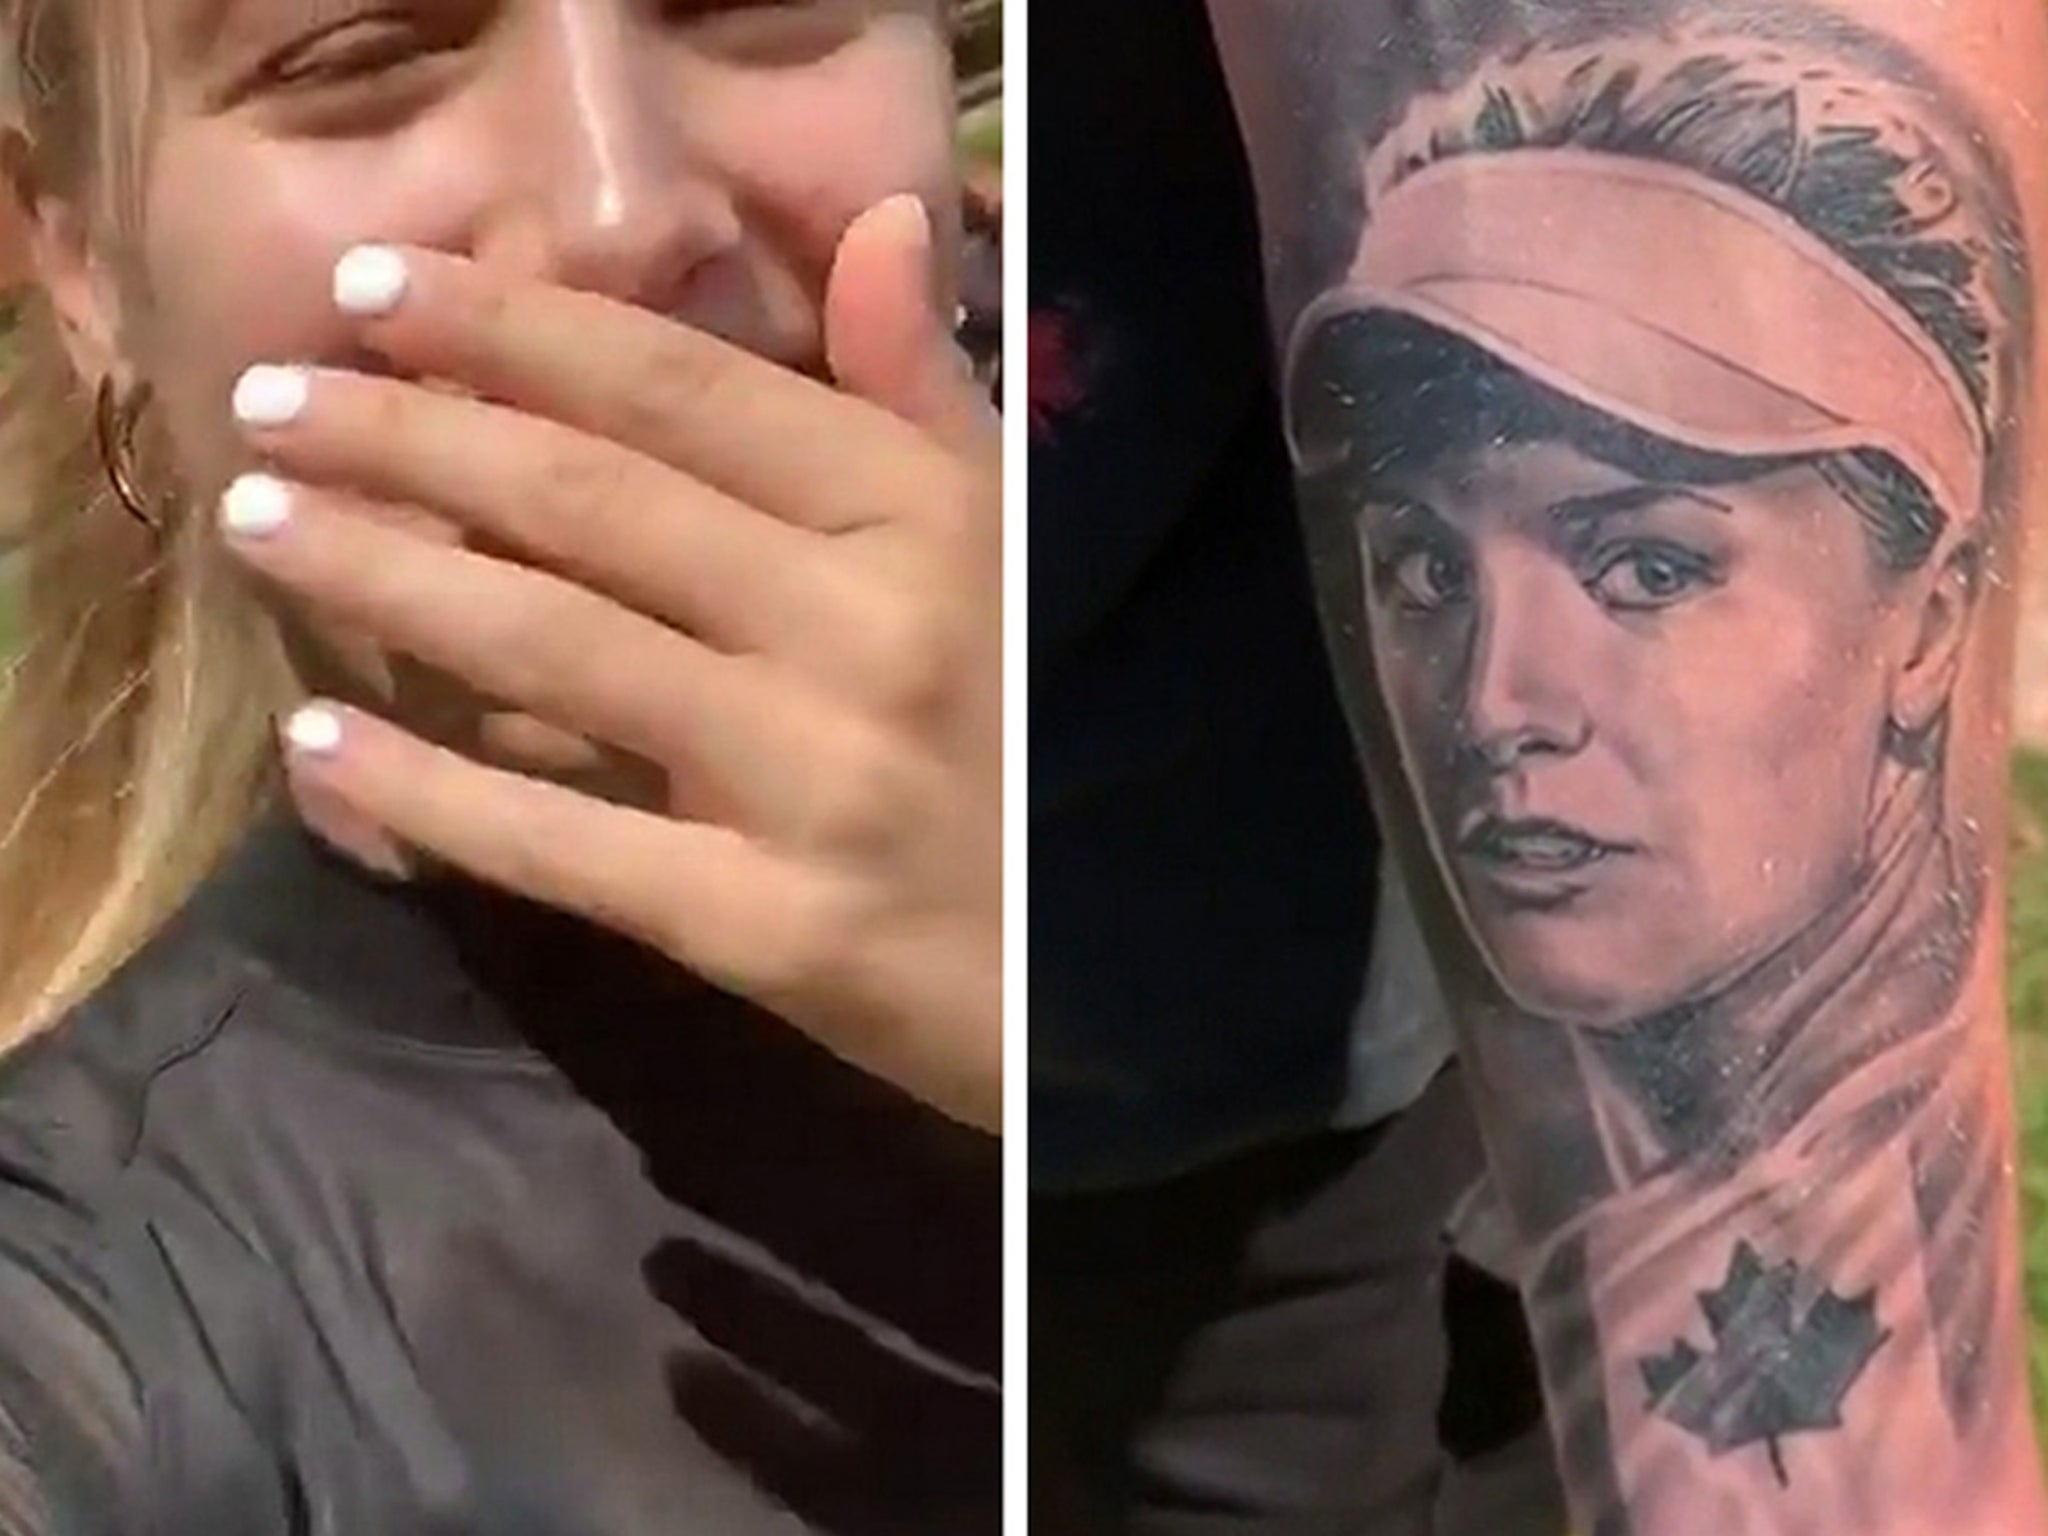 Genie Bouchard Meets Fan With Massive Tat of Her Face, 'This is Insane'